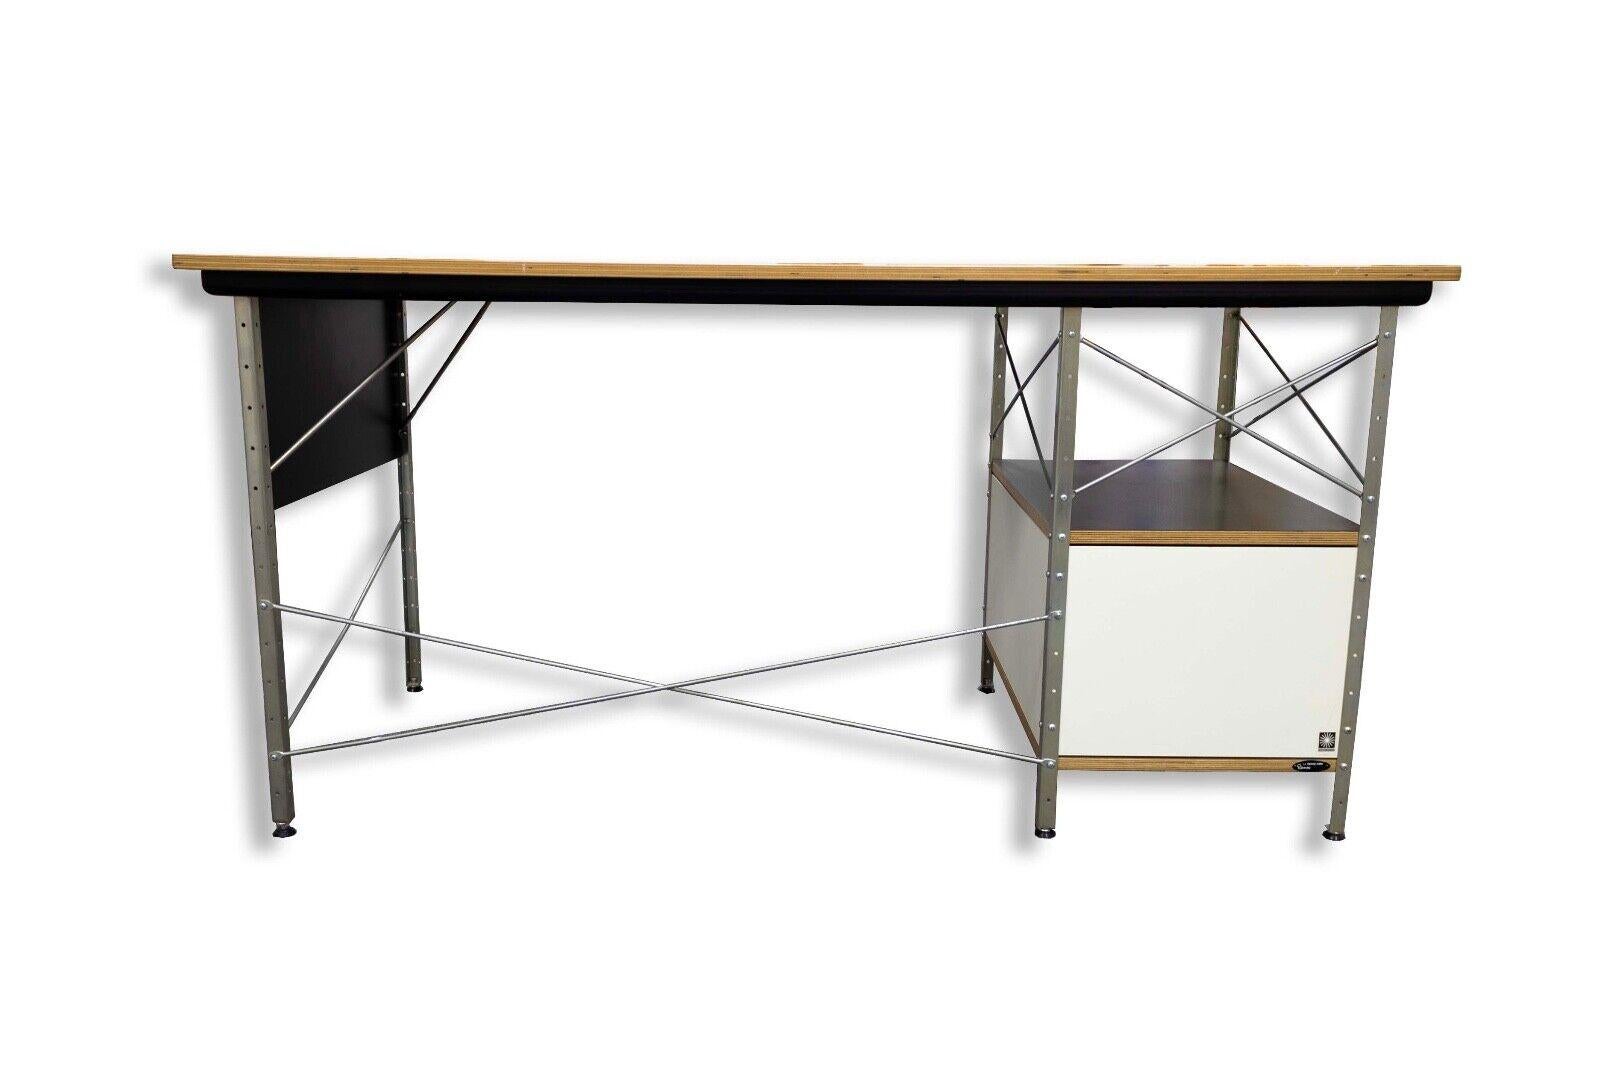 The Charles and Ray Eames desk is a quintessential example of mid-century modern design, representing the creative brilliance of this renowned design duo. Characterized by its clean lines and minimalist aesthetic, this desk effortlessly combines